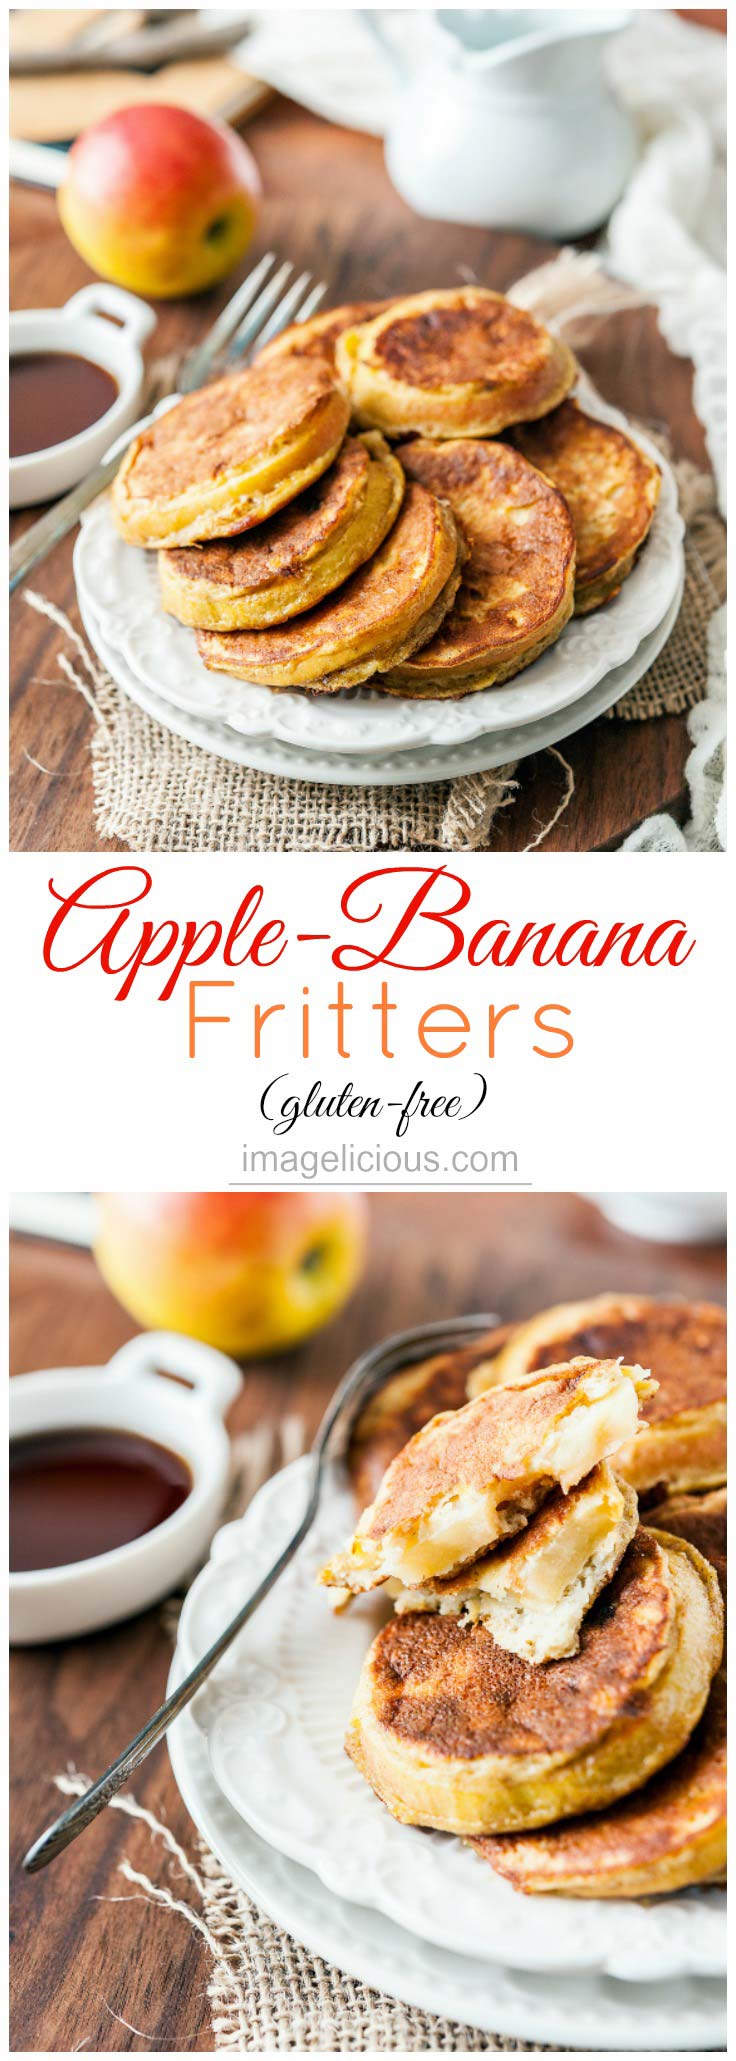 Apple Banana Fritters taste like dessert but are perfect for a healthy breakfast. They are gluten-free, easy to make and have only a handful of ingredients | Imagelicious